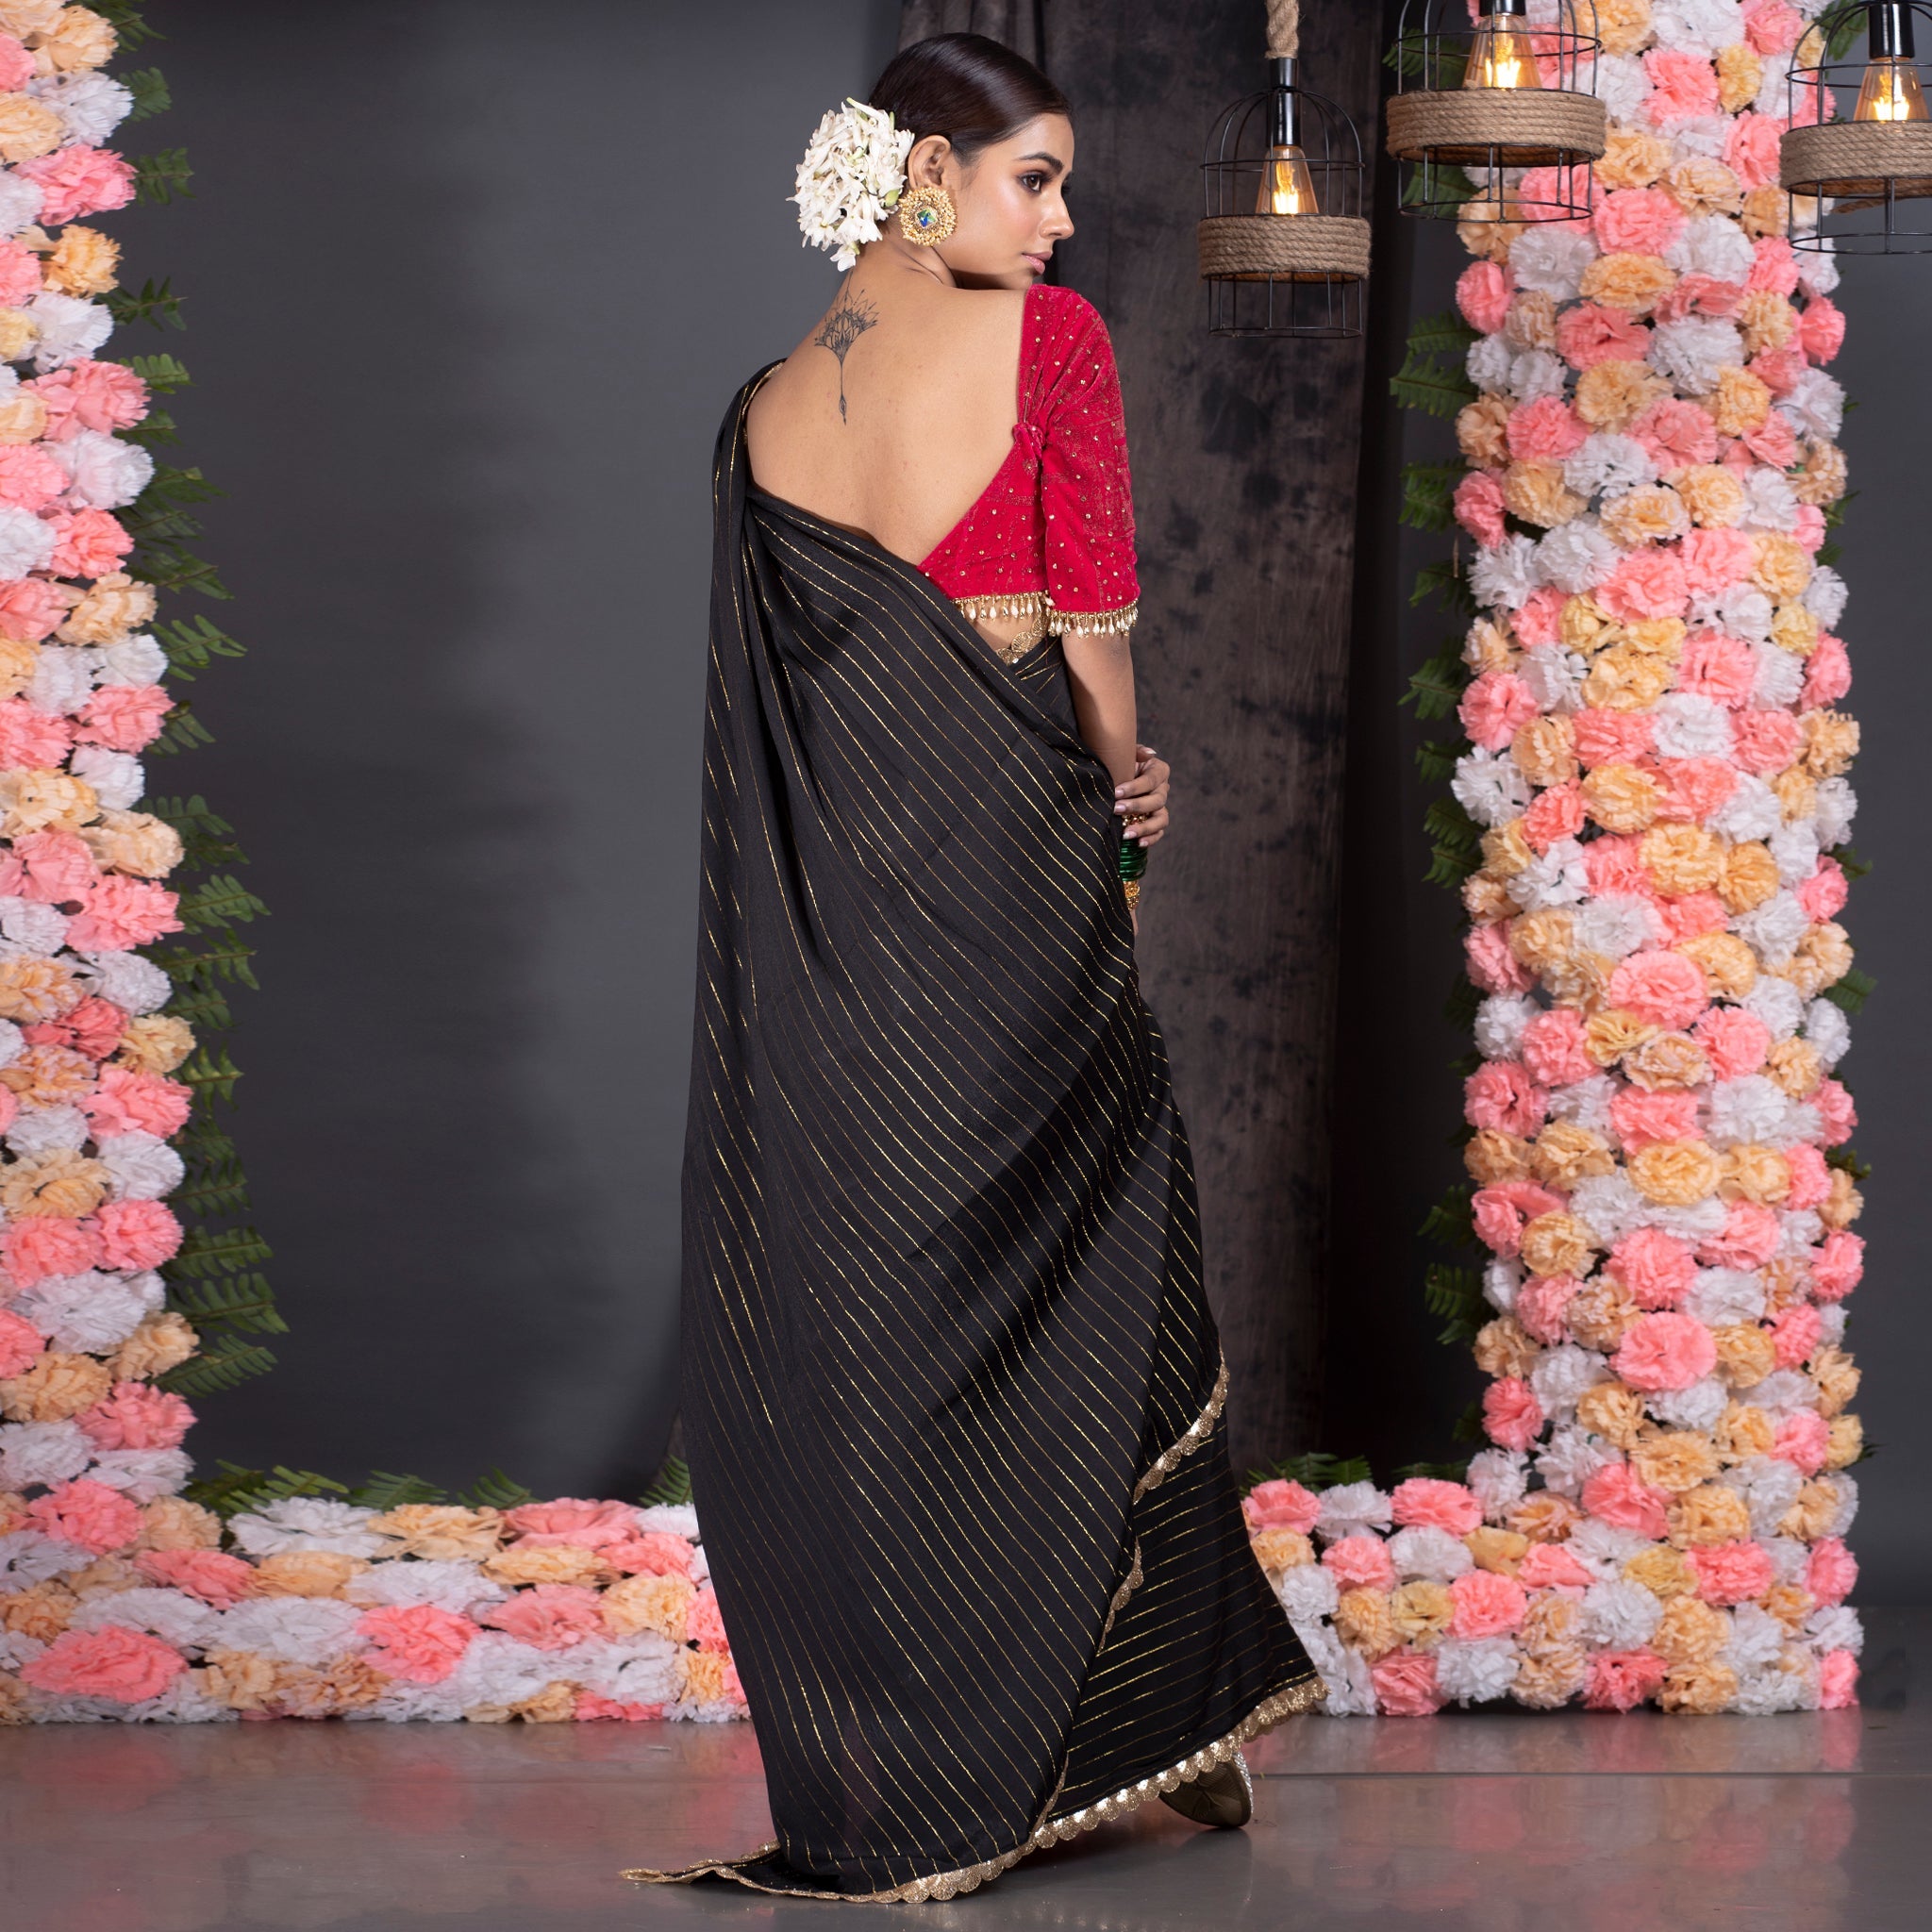 Women's Black Georgette Saree With Lurex Gold Stripes And Scallop Embroidered Border - Boveee